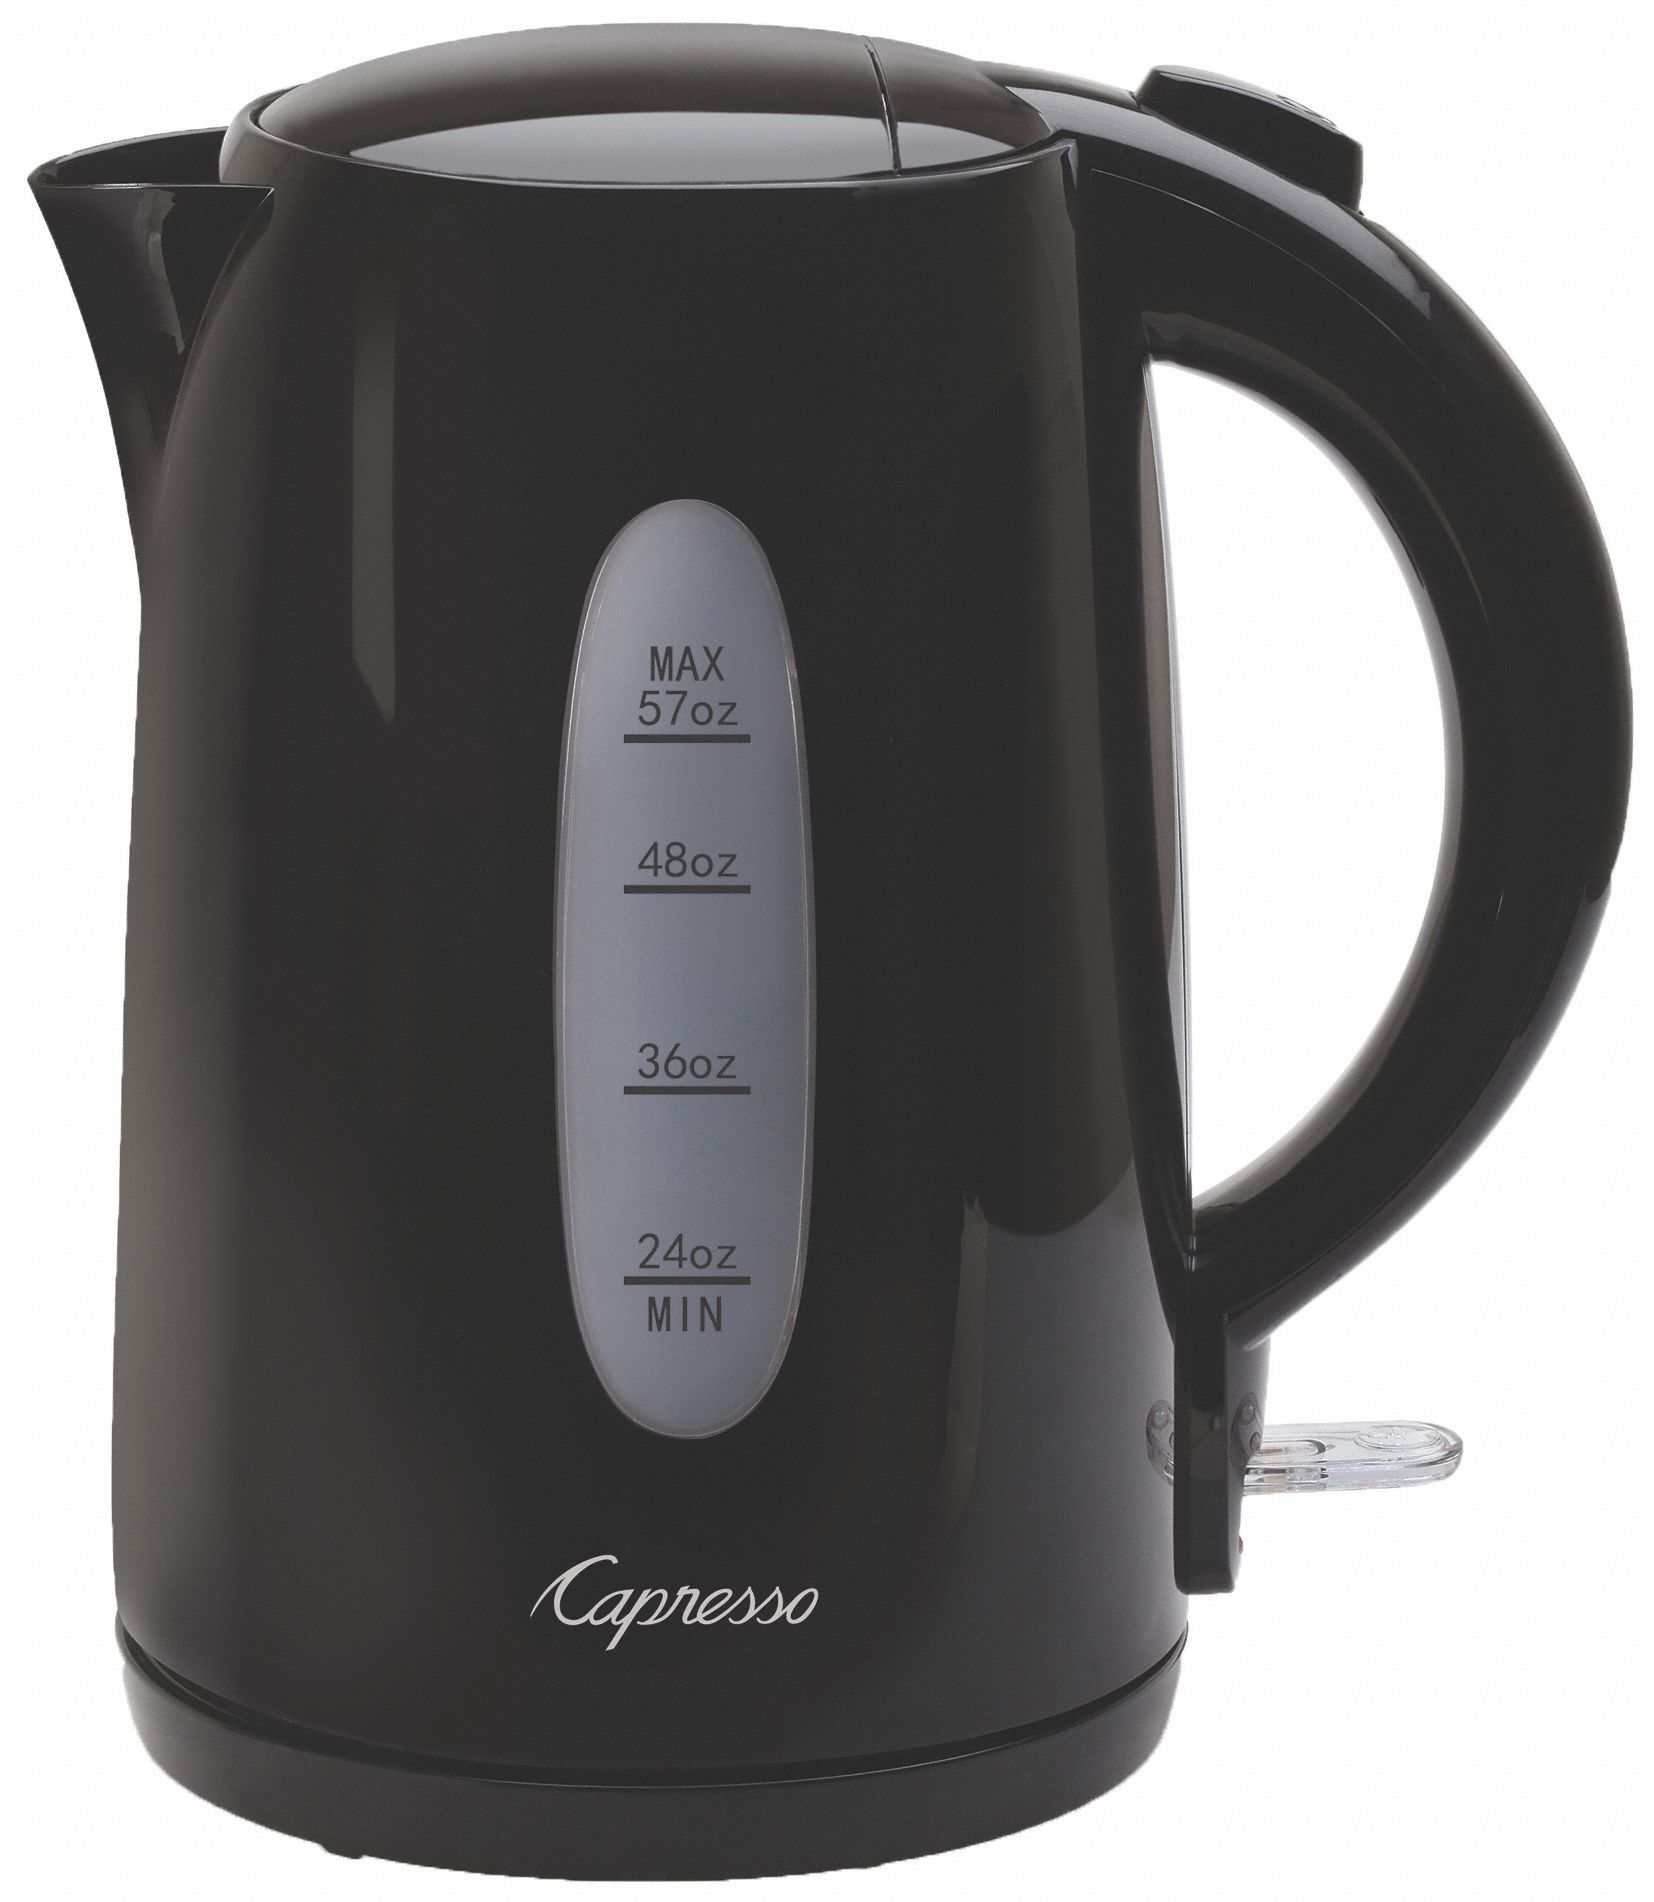 Electric Water Kettle: 1.7 L Capacity, Black, Auto Shut-Off, 9 3/4 in x 6 in x 9 in